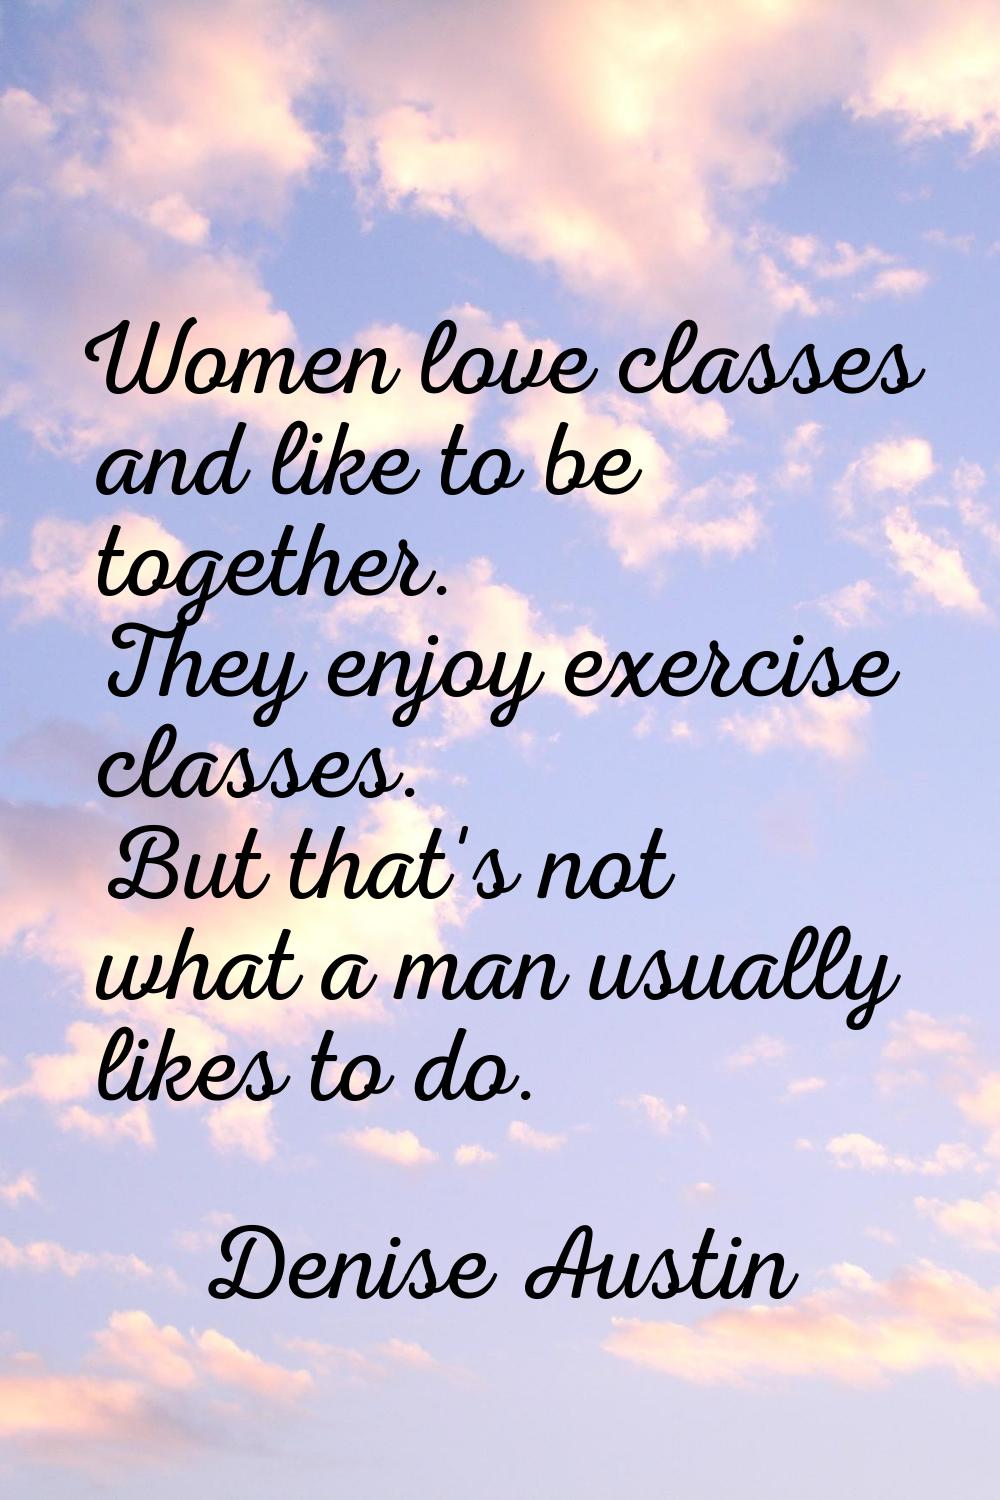 Women love classes and like to be together. They enjoy exercise classes. But that's not what a man 